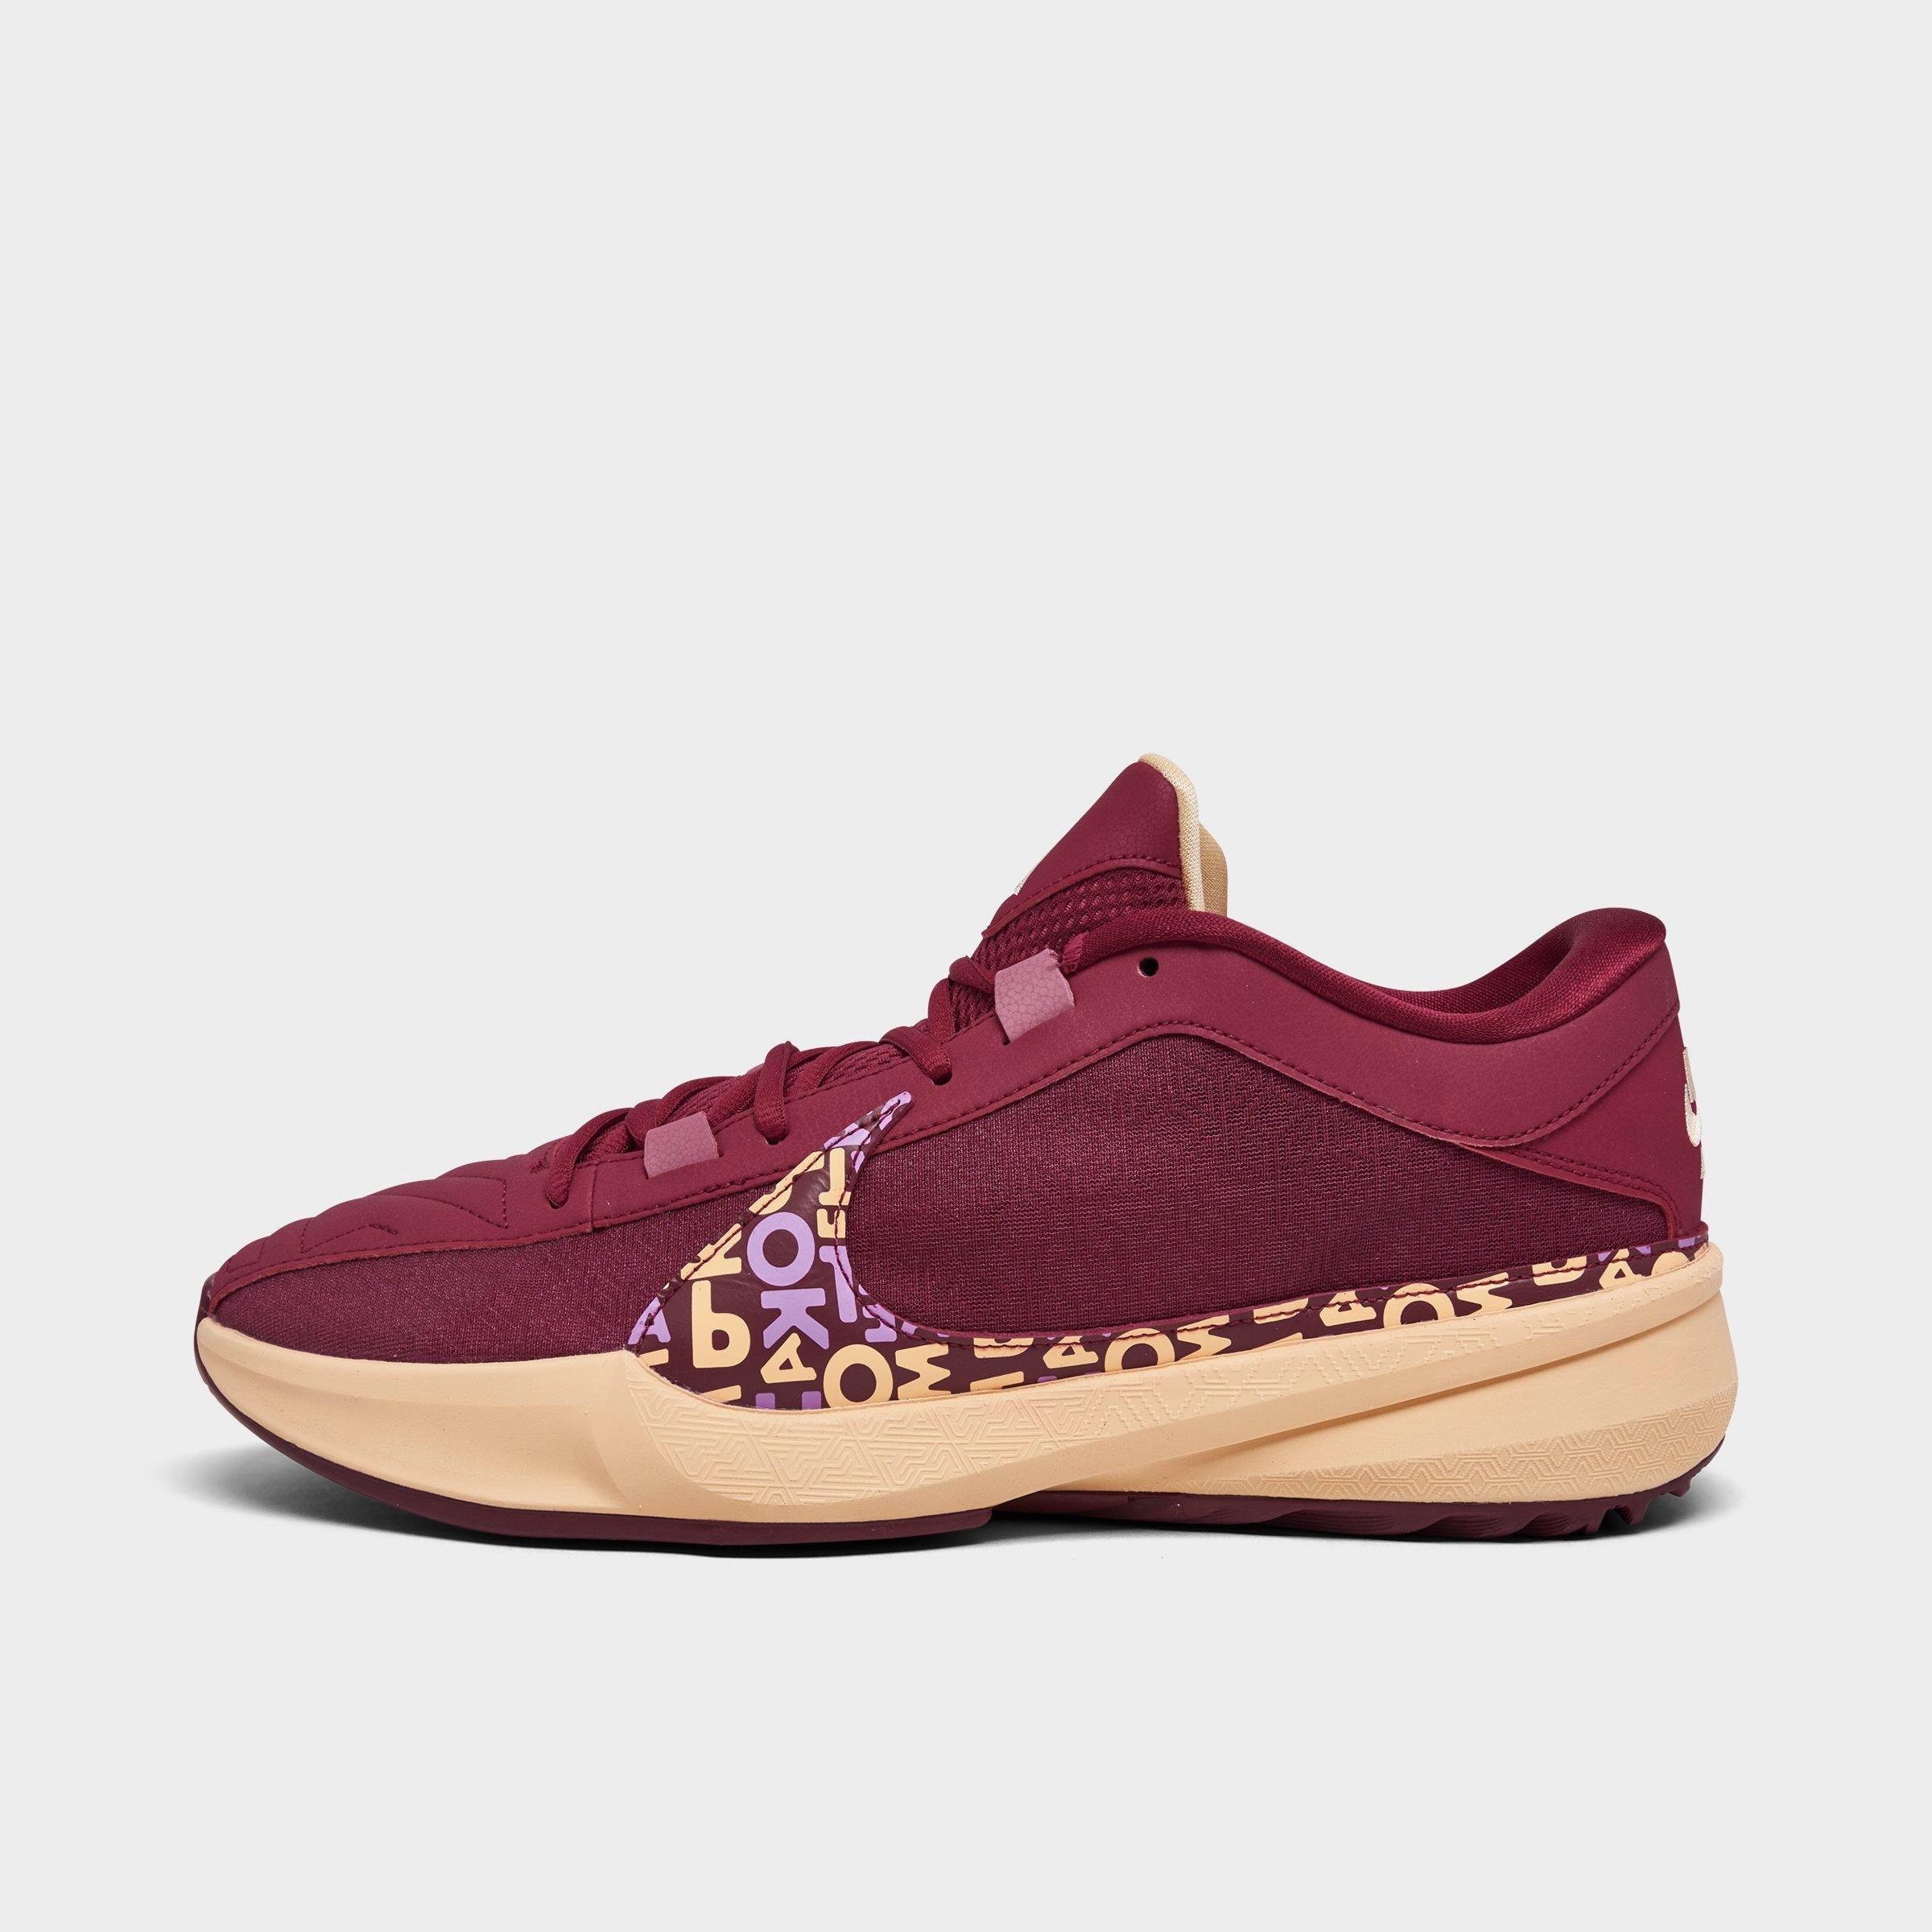 Nike Zoom Freak 5 Basketball Shoes In Noble Red/ice Peach/desert Berry